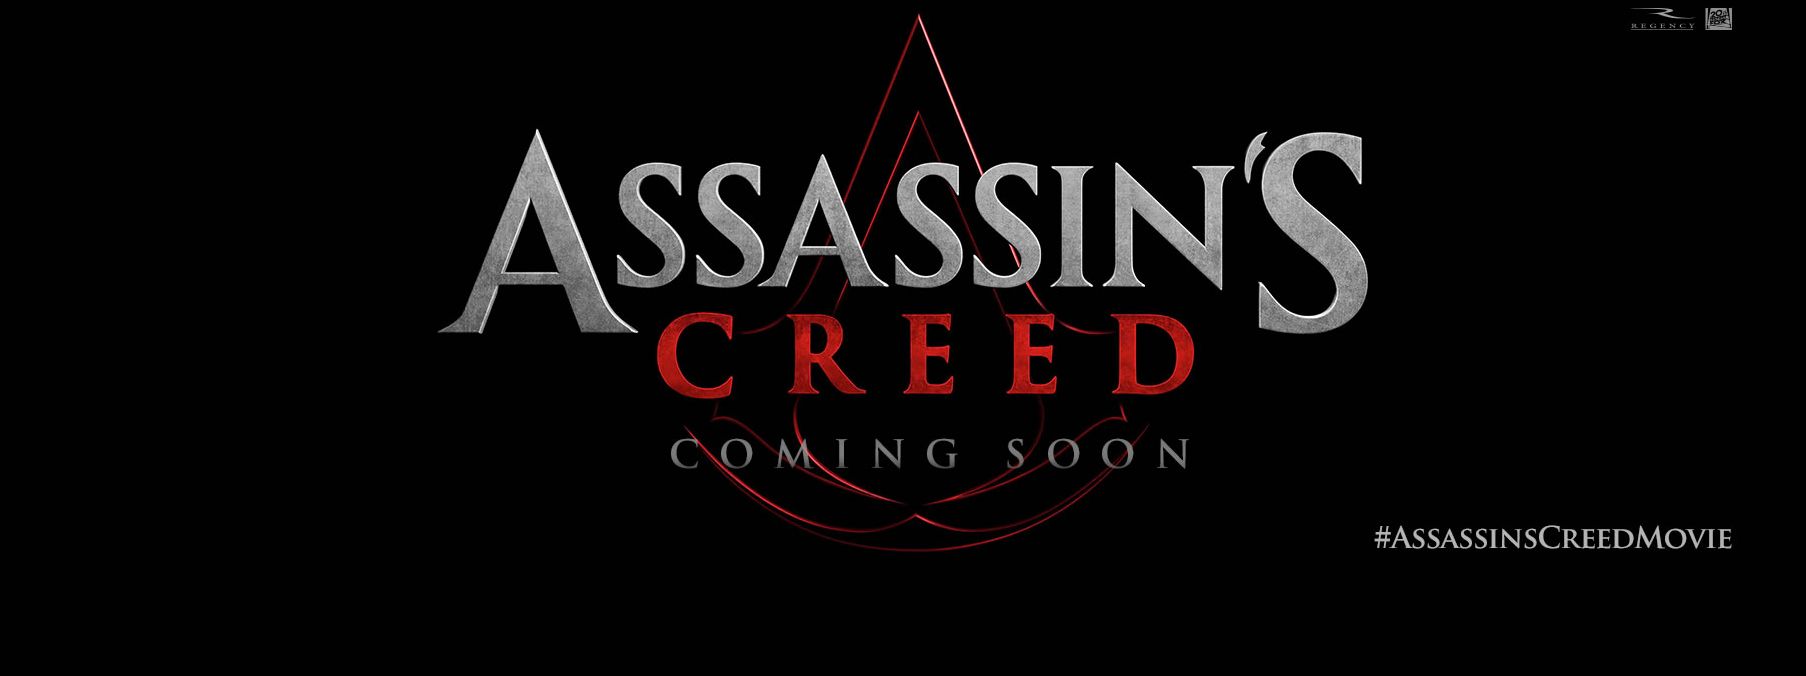 New logo for Assassin's Creed